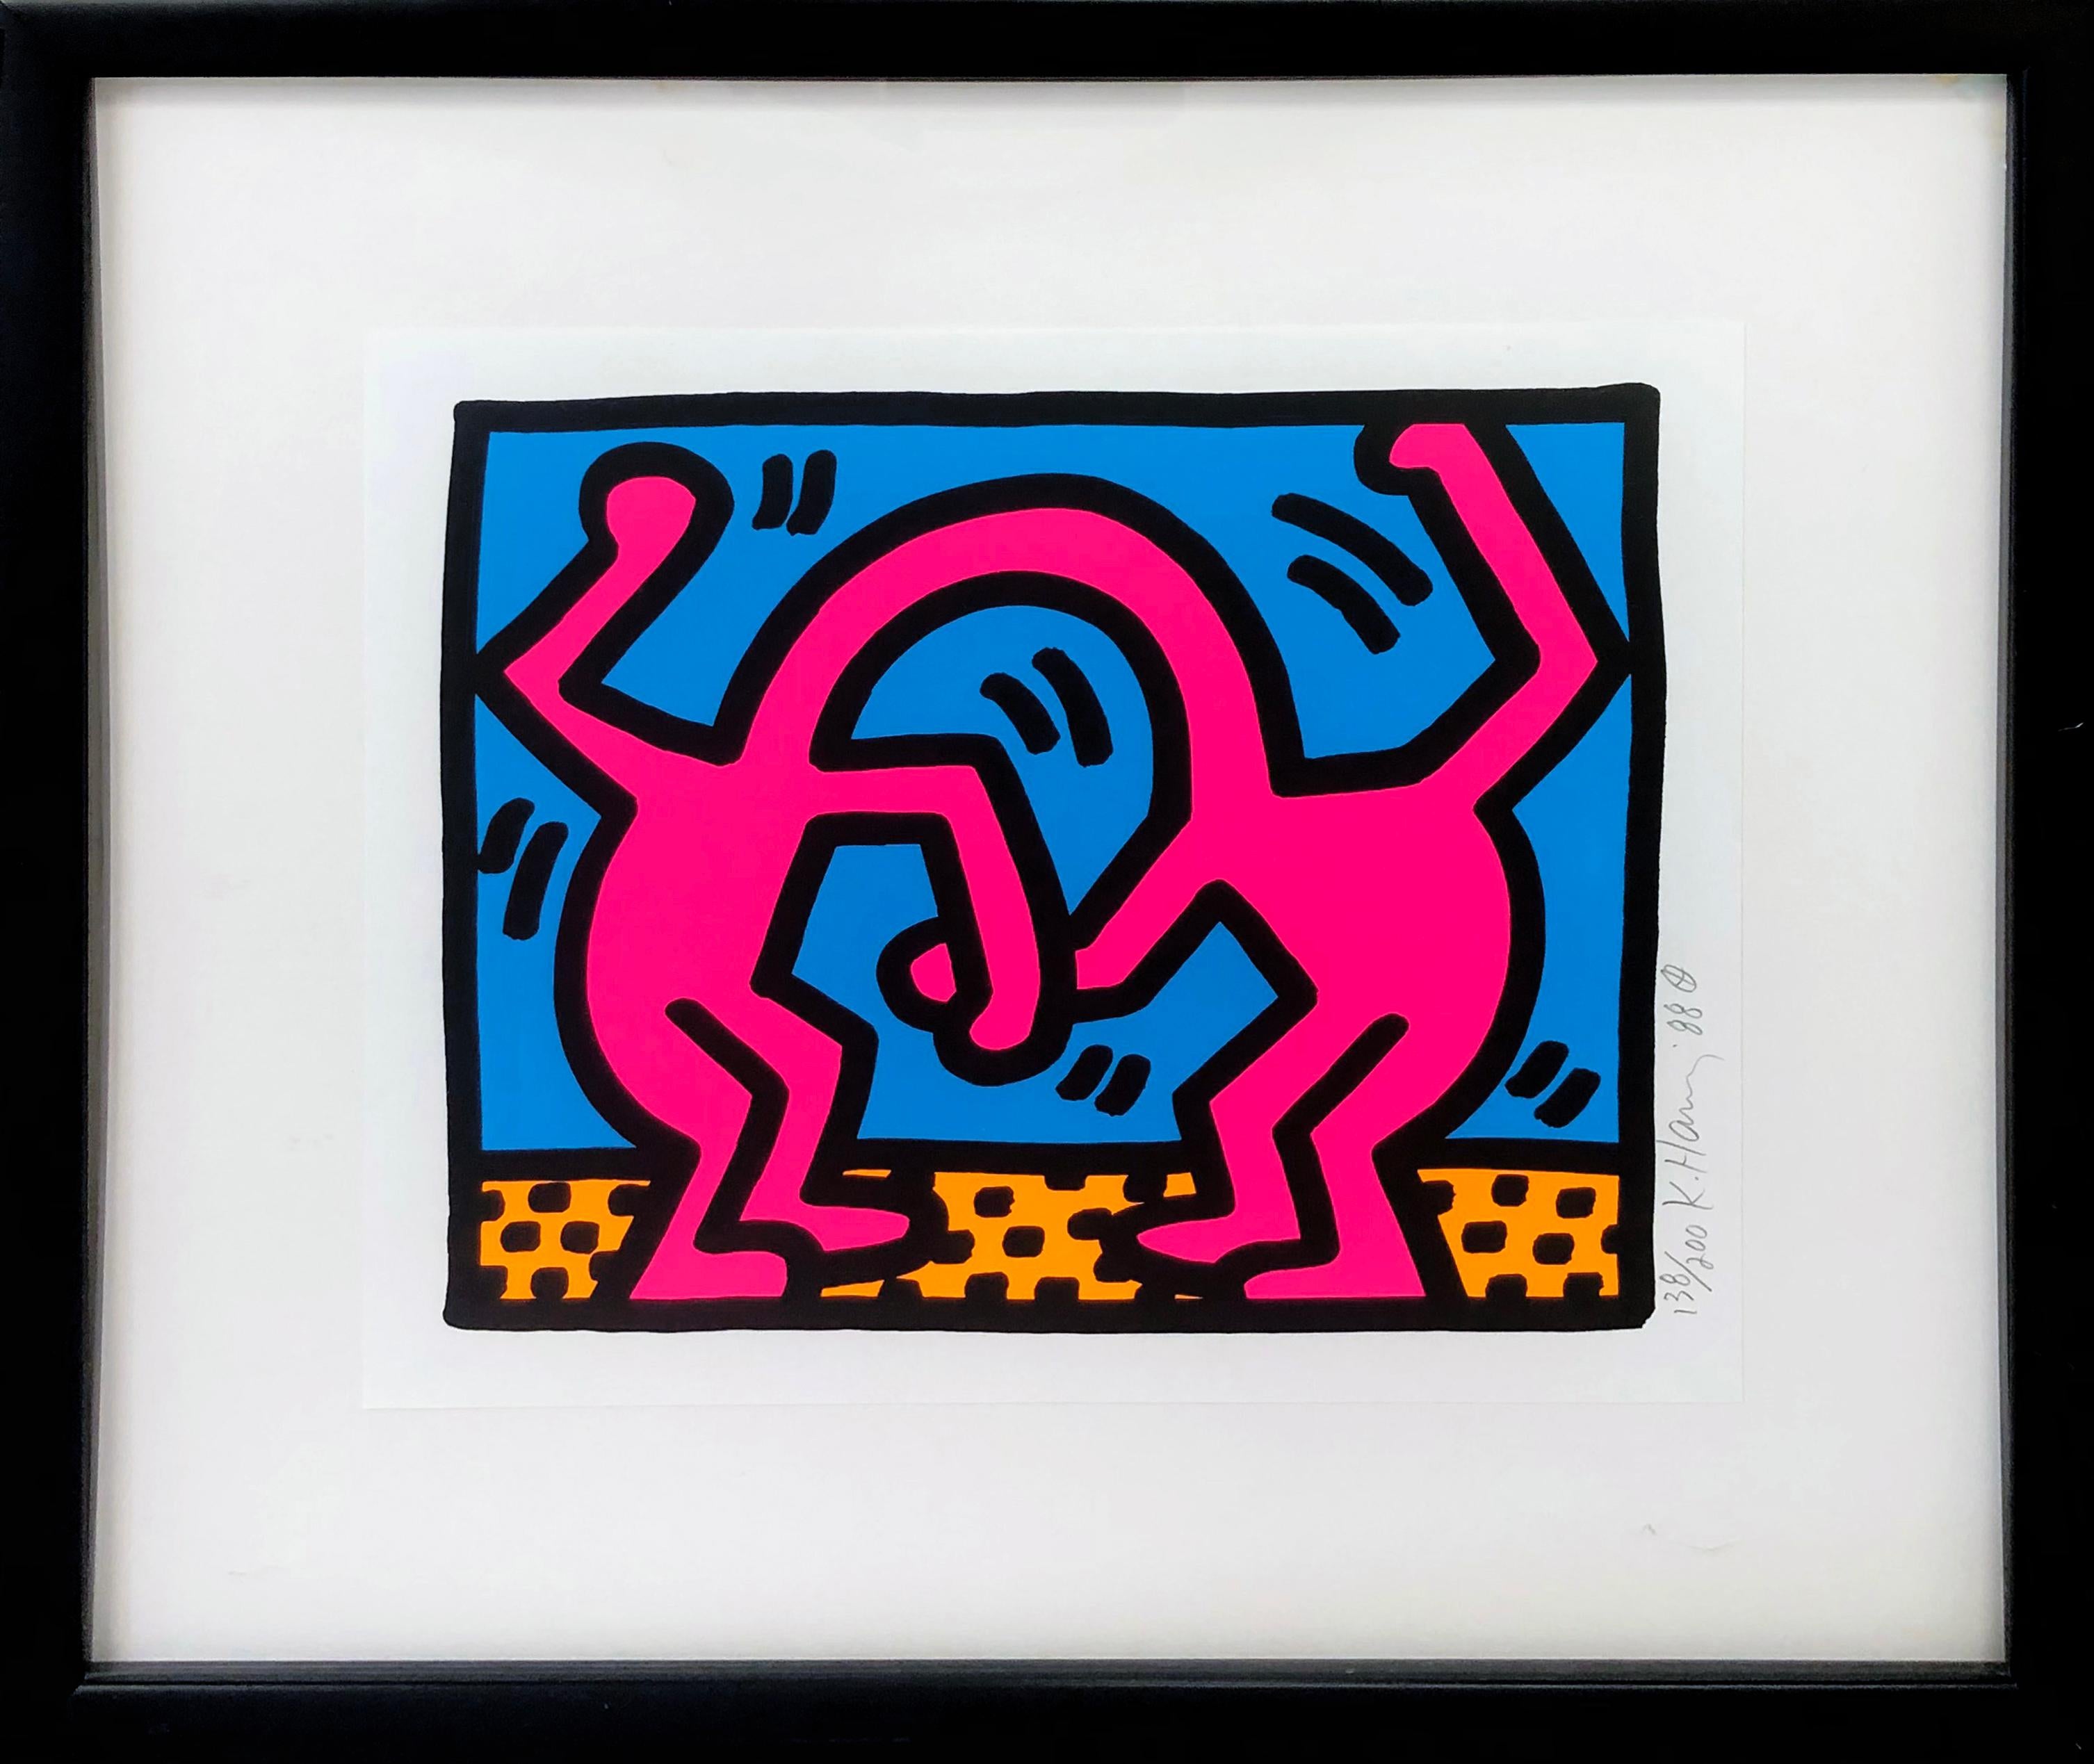 Keith Haring Portrait Print - "UNTITLED" FROM POP SHOP I